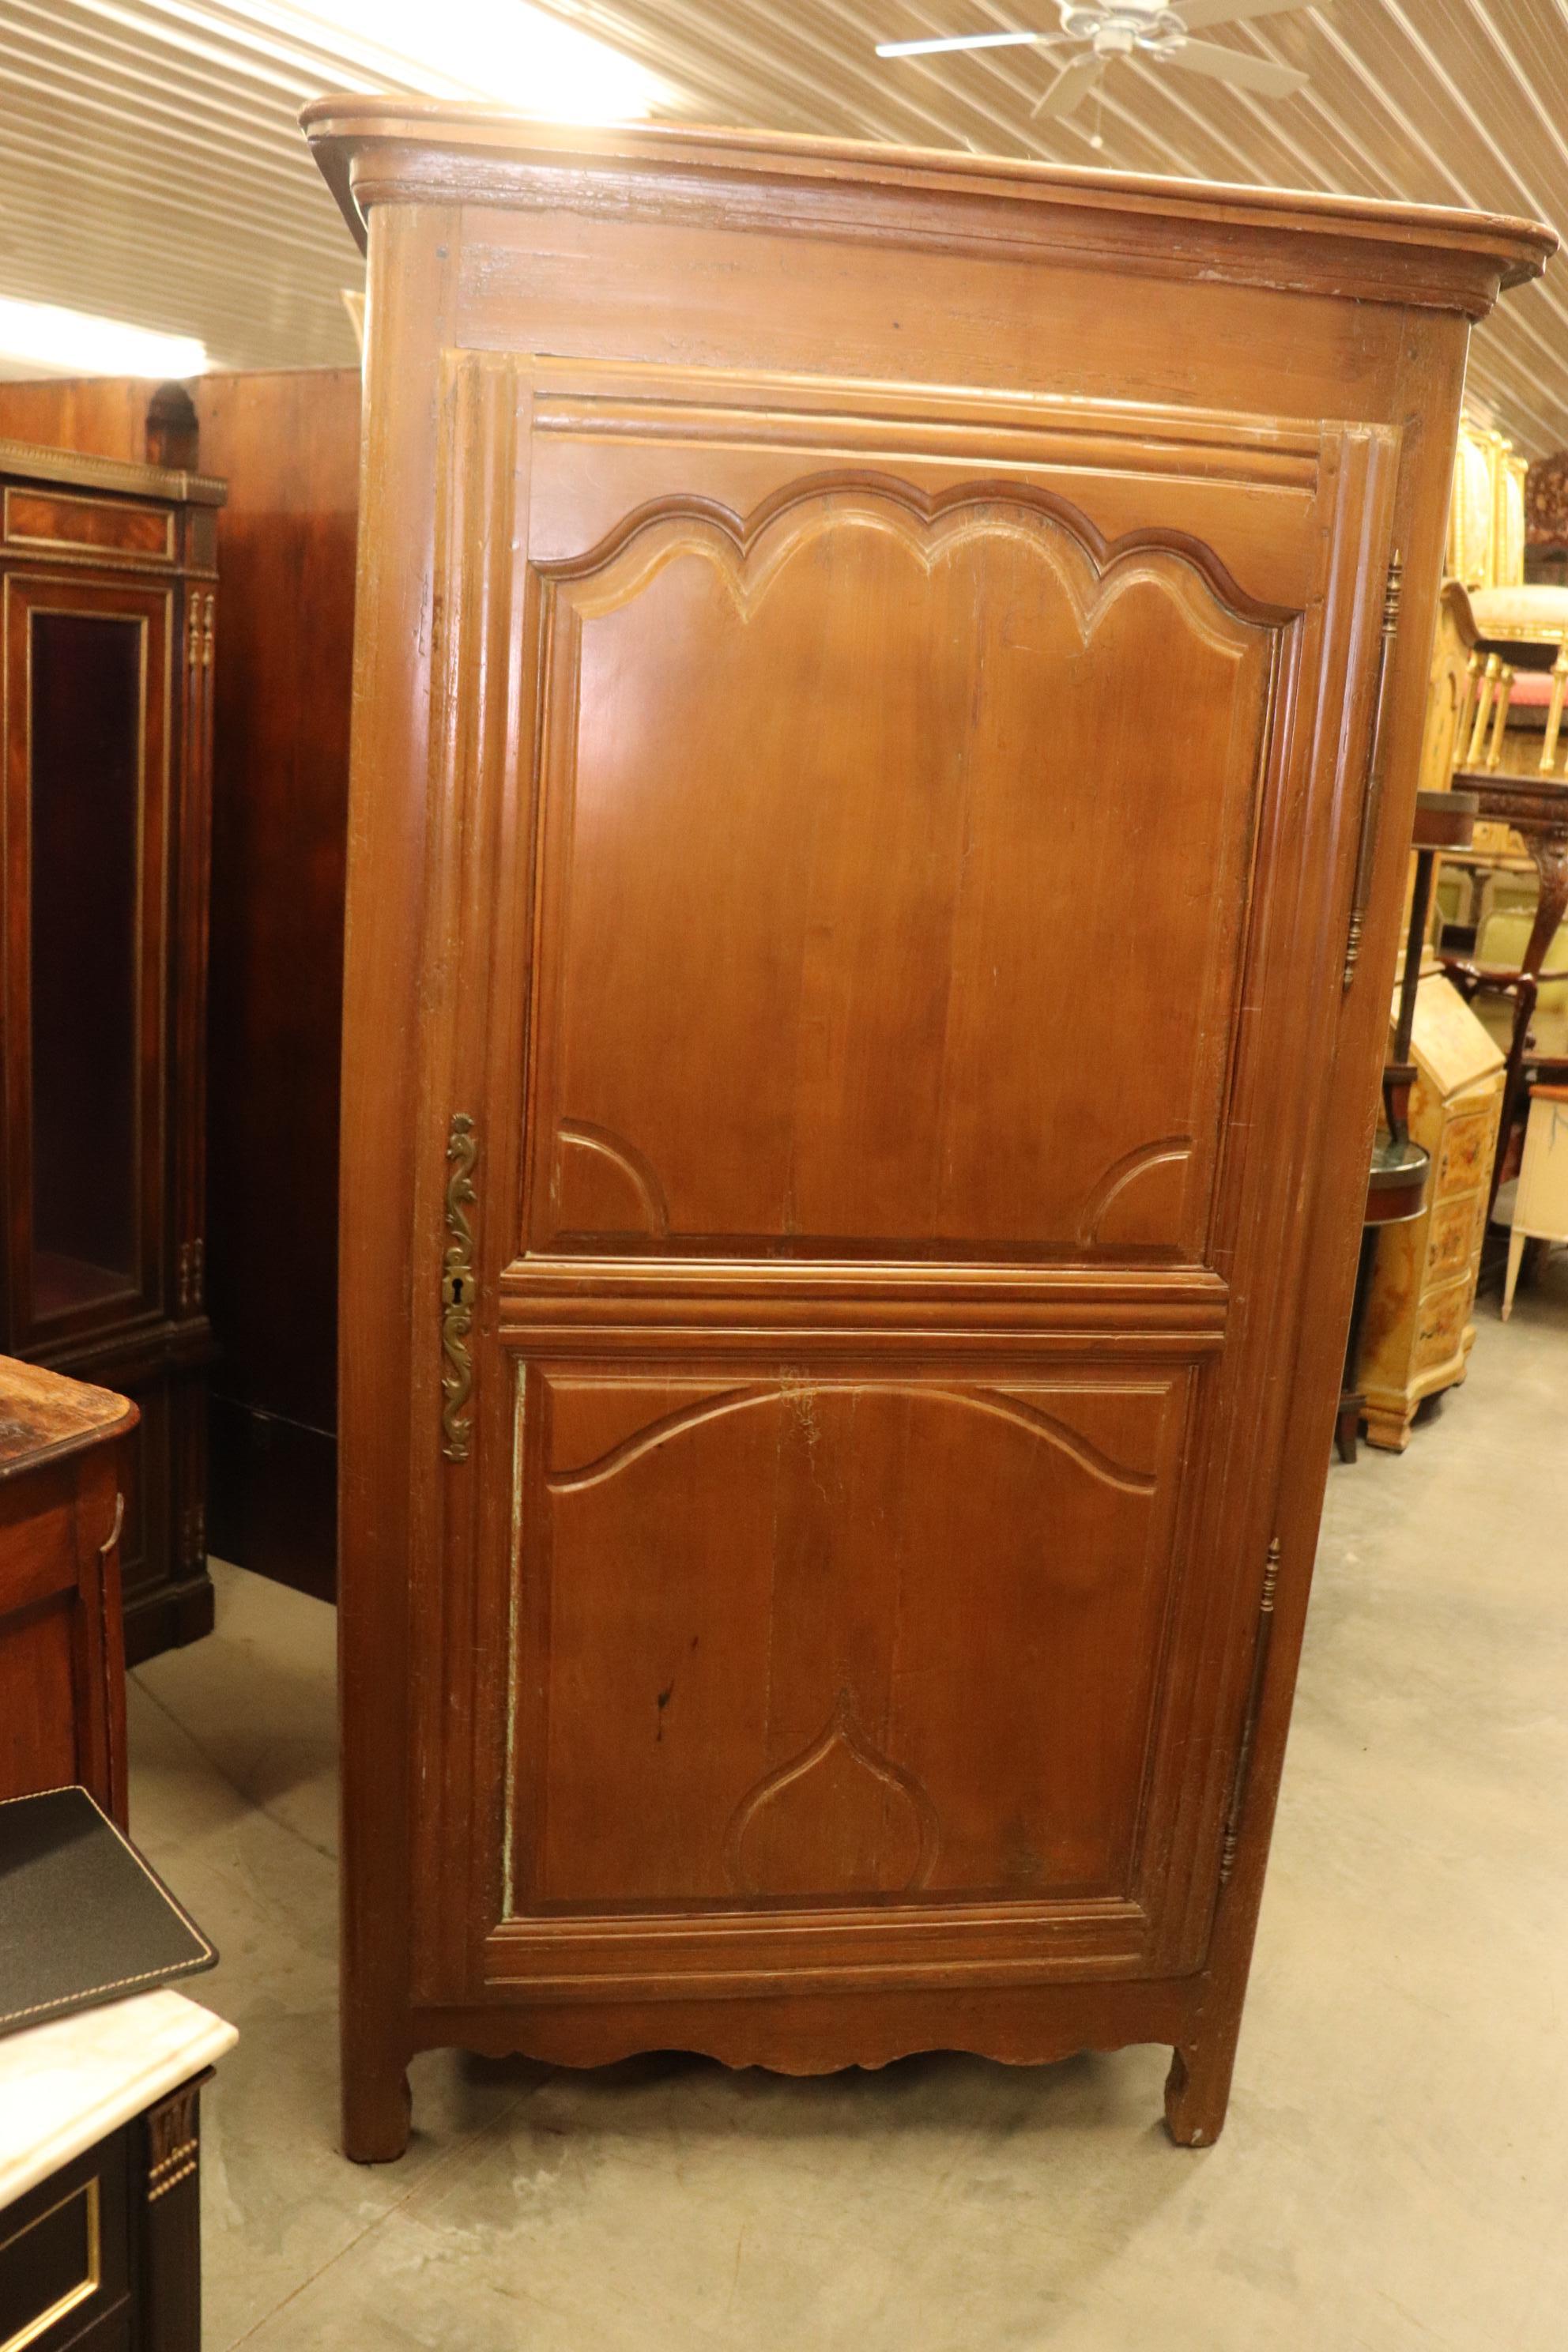 This is a gorgeous solid oak French bonnetiere or single door armoire. The armoire has all of the desirable features most collectors yearn for, worming, an old lock and a beautiful hand-hewn interior. The armoire measures 76 tall x 23.5 inches deep